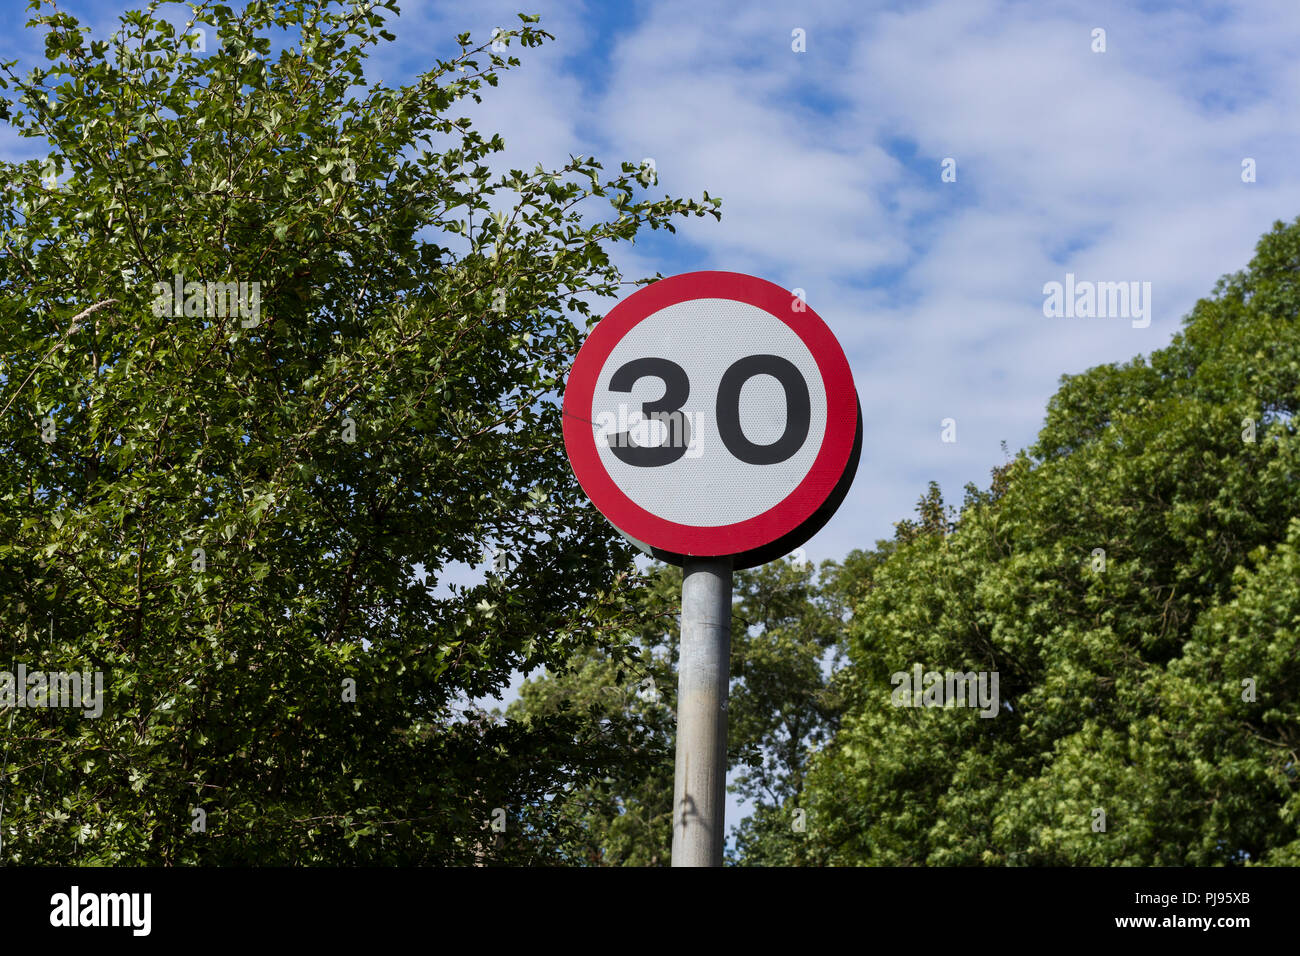 30 mph, round, red & white British road traffic sign against trees & blue sky with clouds background, England, UK Stock Photo